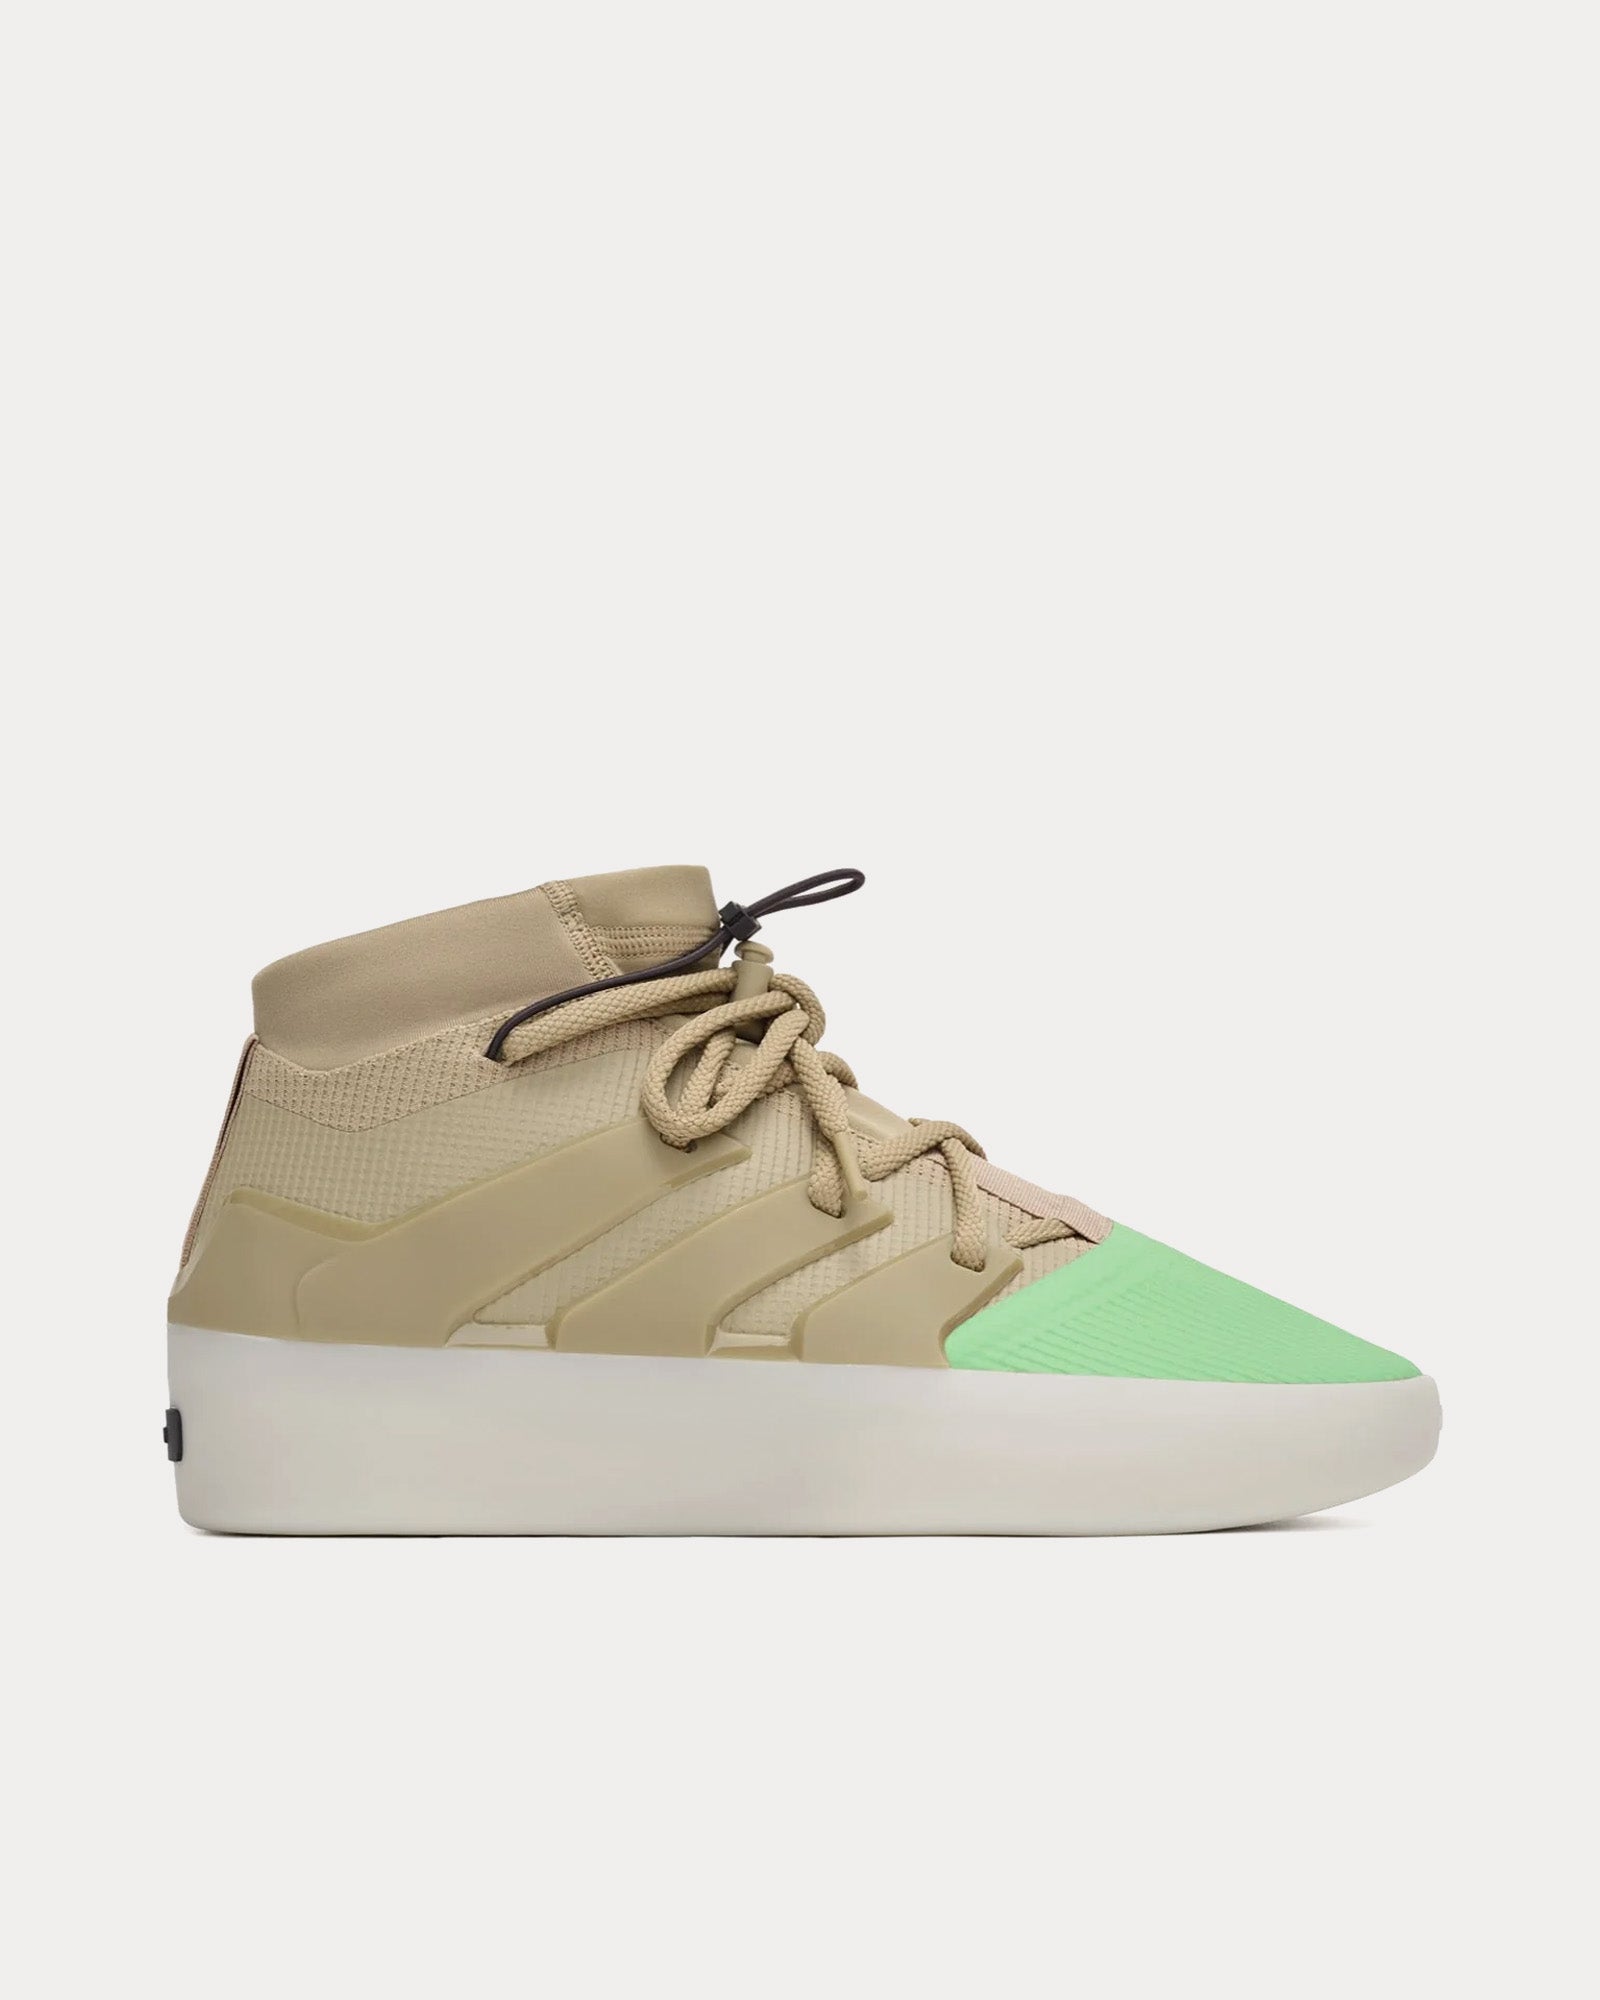 Fear of God Athletics - One Model Clay / Mint High Top Sneakers